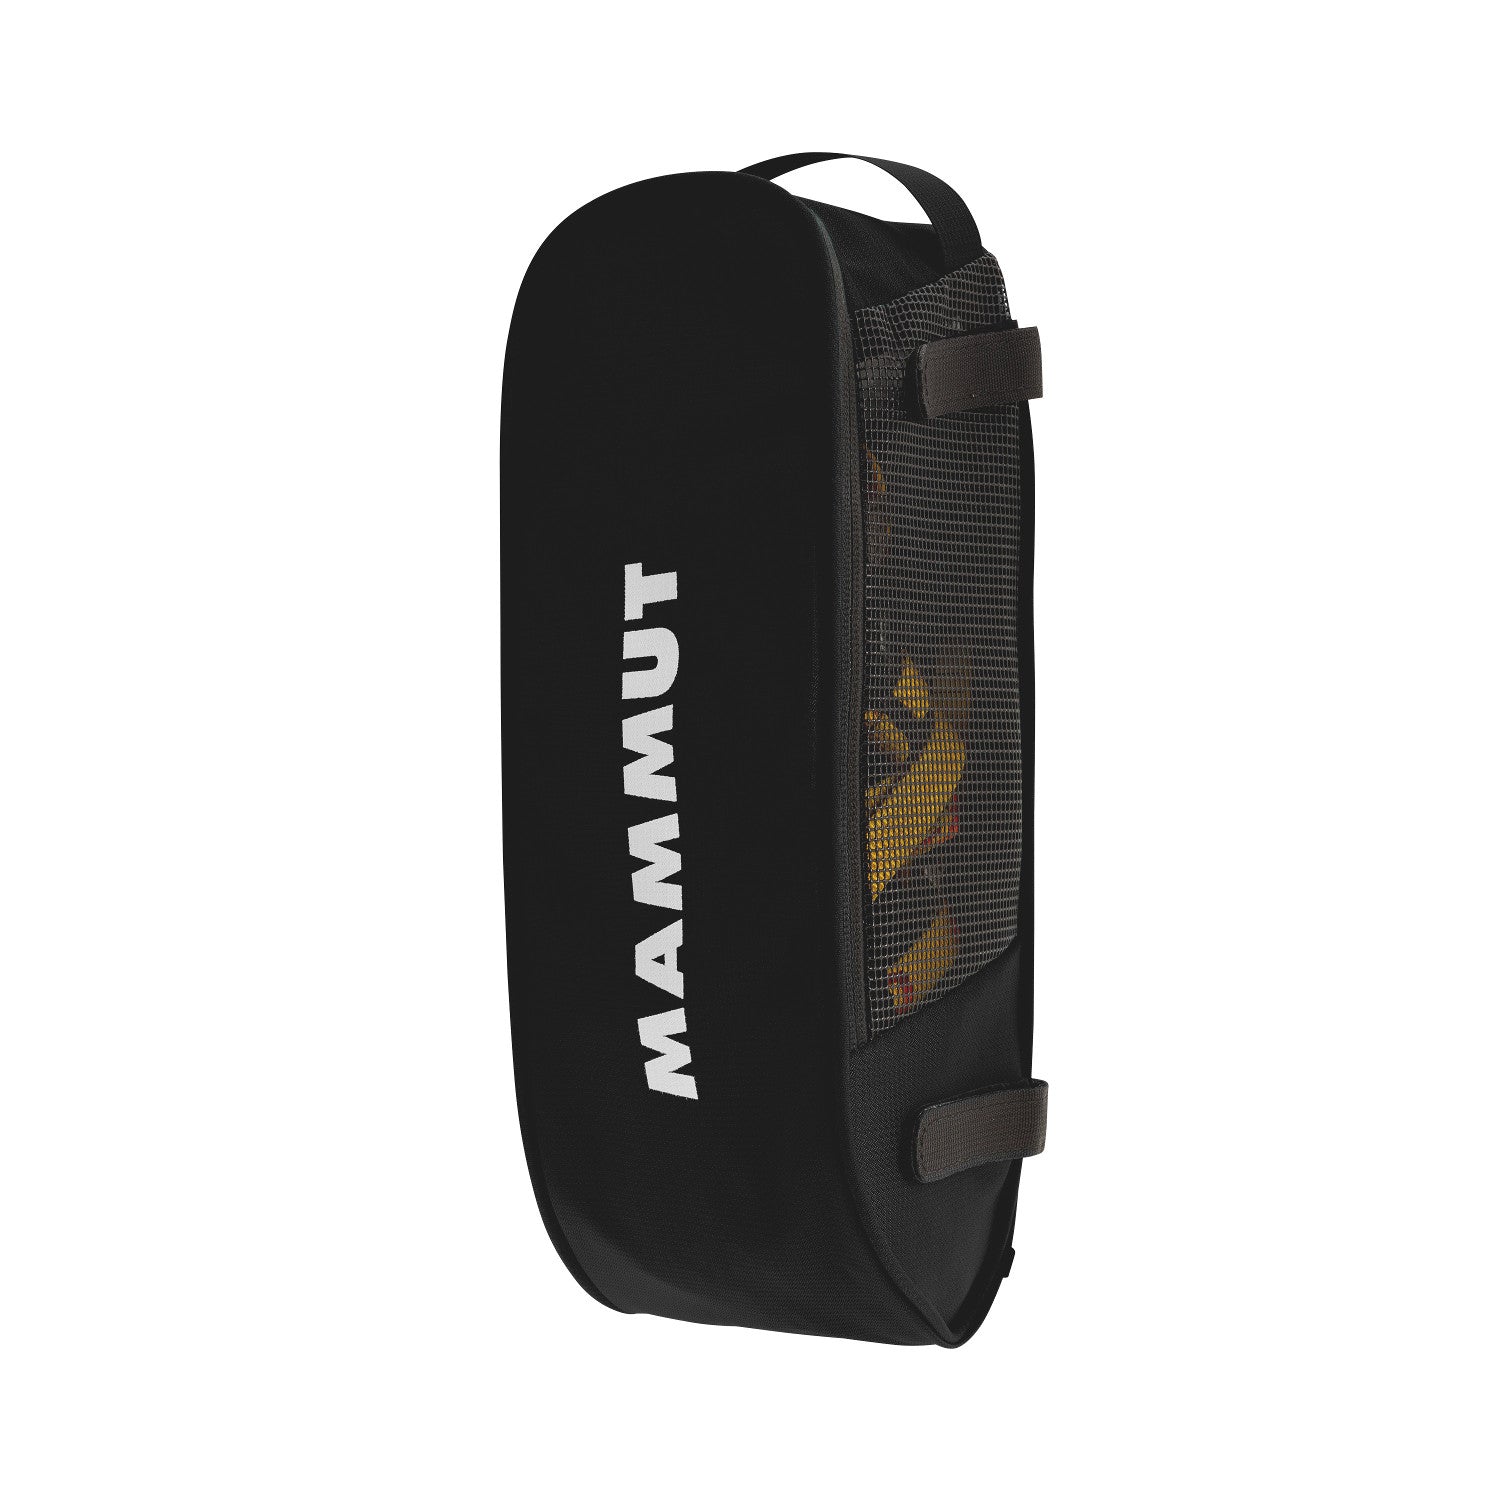 Mammut Crampon Pocket, front/side view shown in black colour